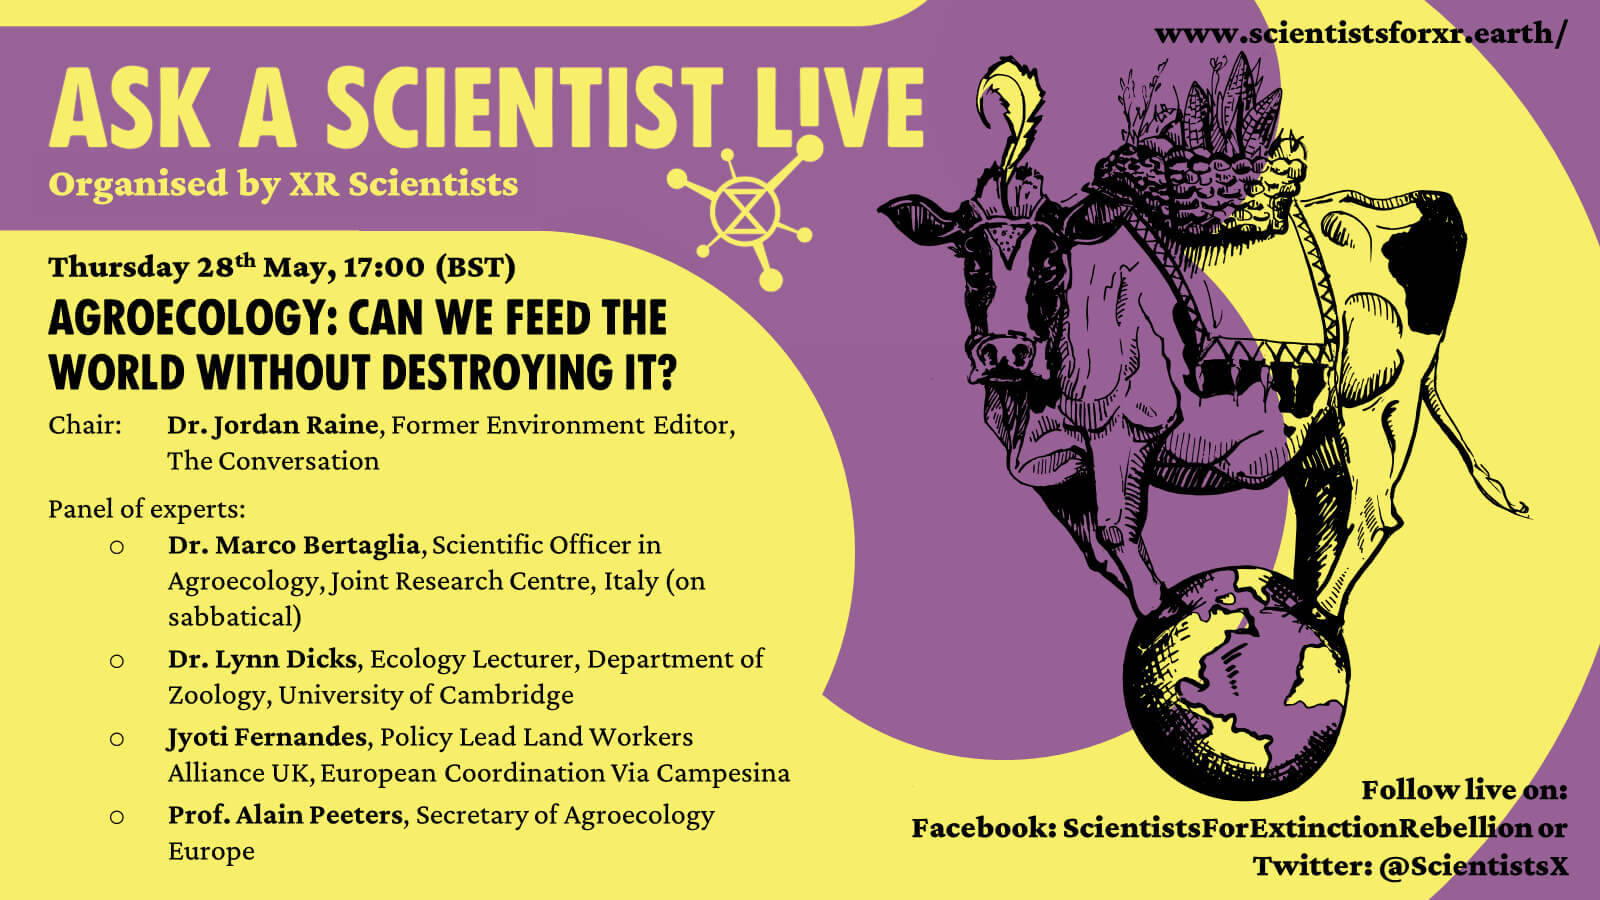 XR Ask a Scientist Live flyer